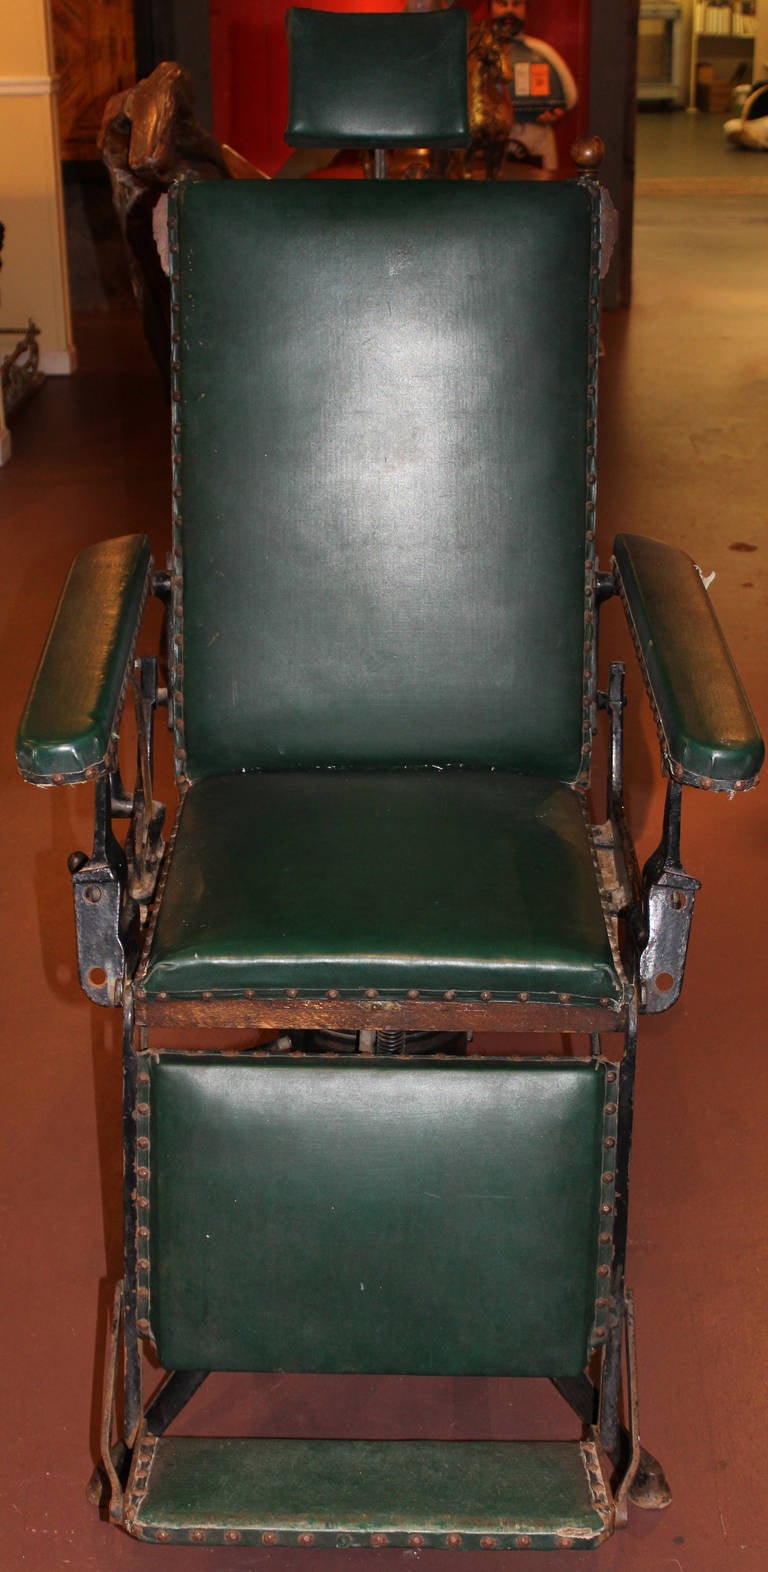 Fantastic late 19th / early 20th century medical or surgical chair manufactured by A. McDannold of St. Louis, MO, signed on base stretcher. Iron adjustable chair base with green leather covered wooden seat and back, carved decoration on seat back,